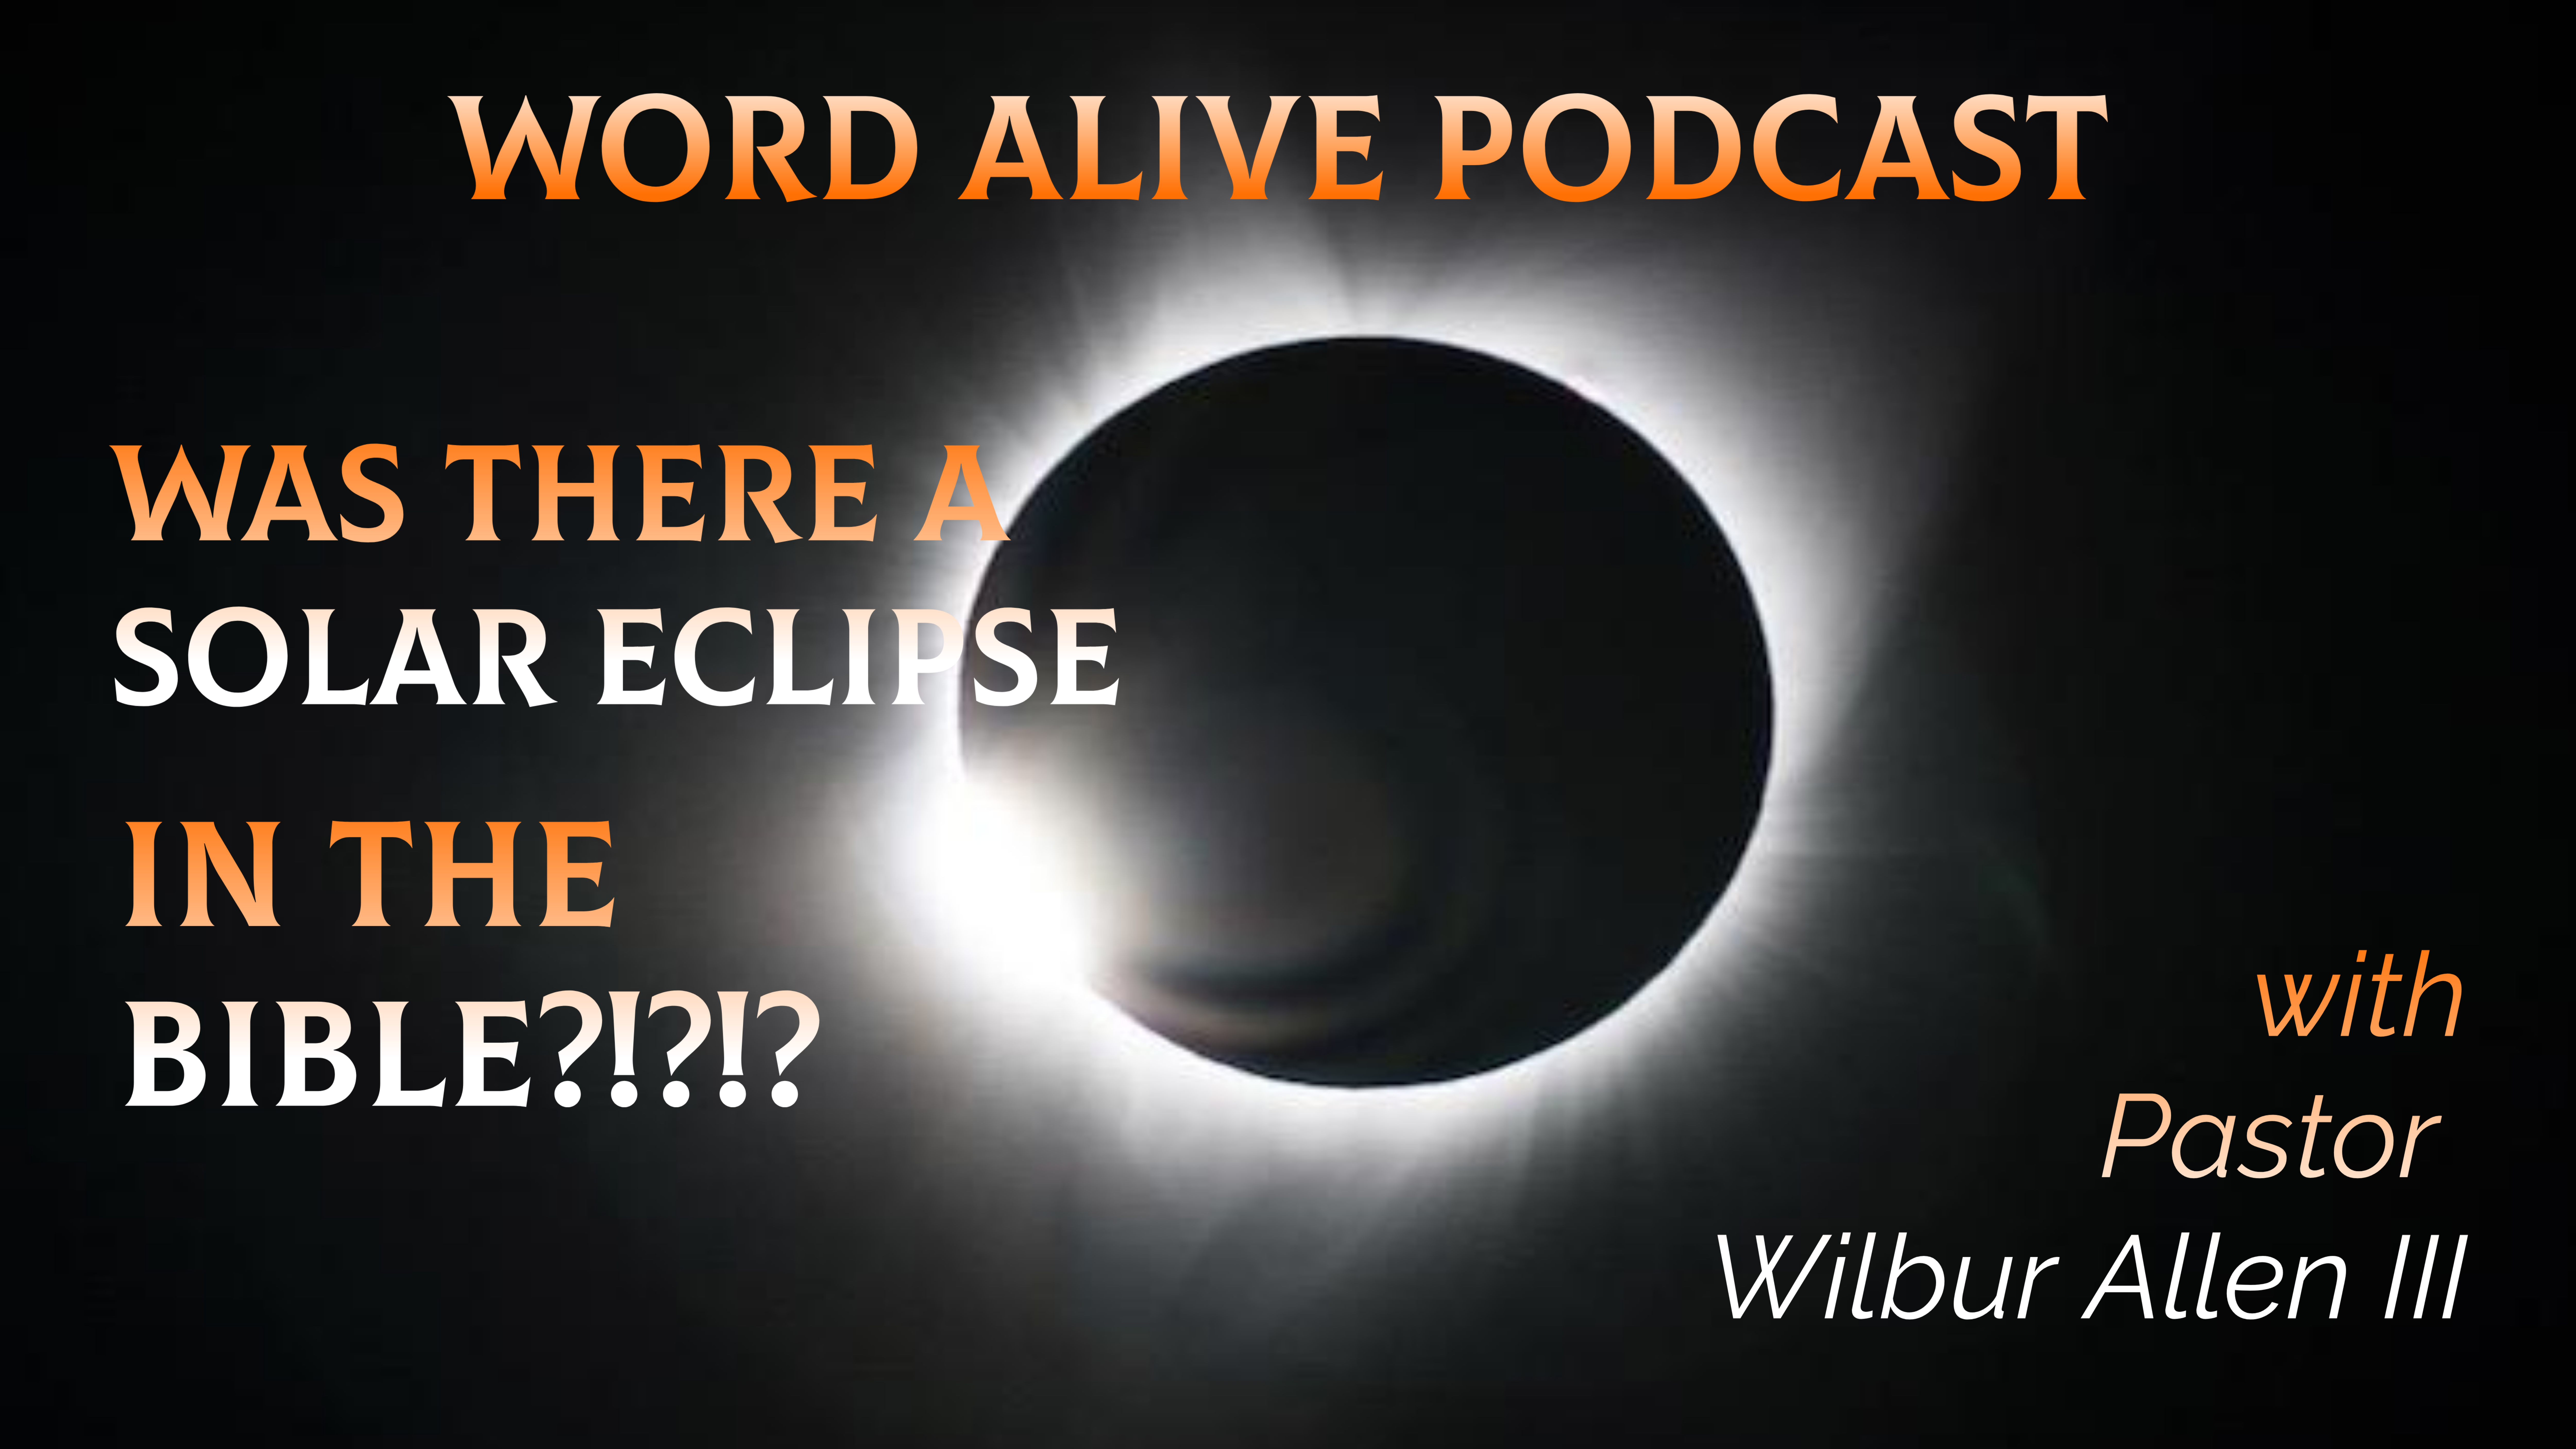 Word Alive Podcast - Was There a Solar Eclipse in the Bible?!?!